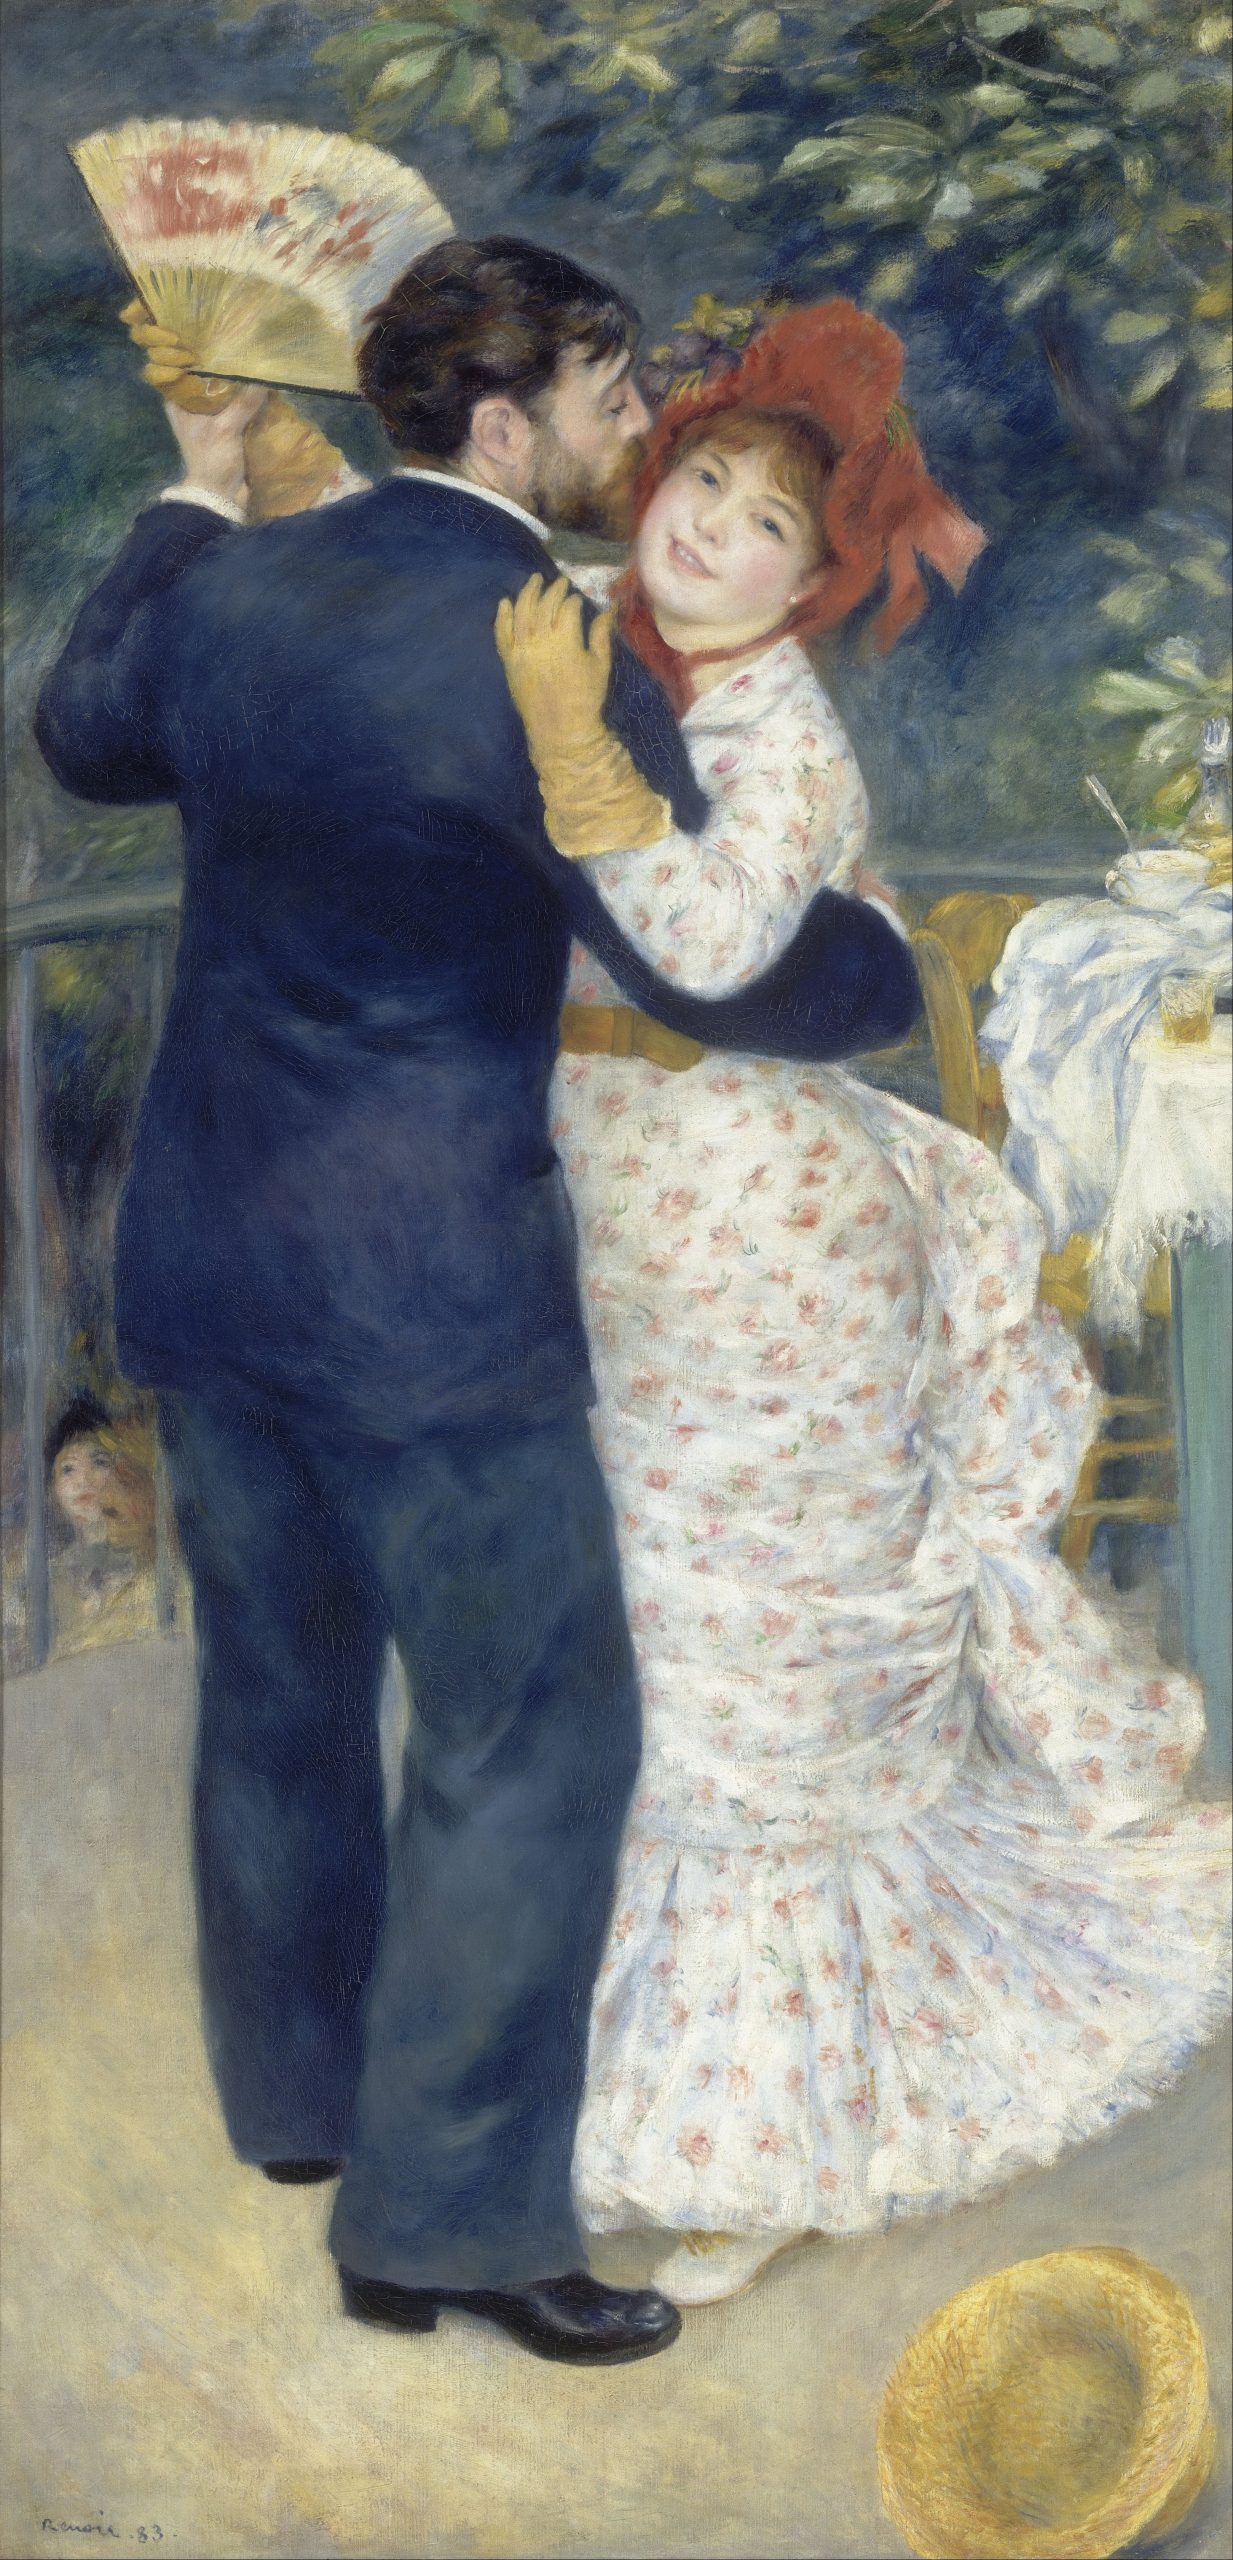 Pierre Auguste Renoir, Dance in the Country (1883). Collection of the Musée d'Orsay, Paris.